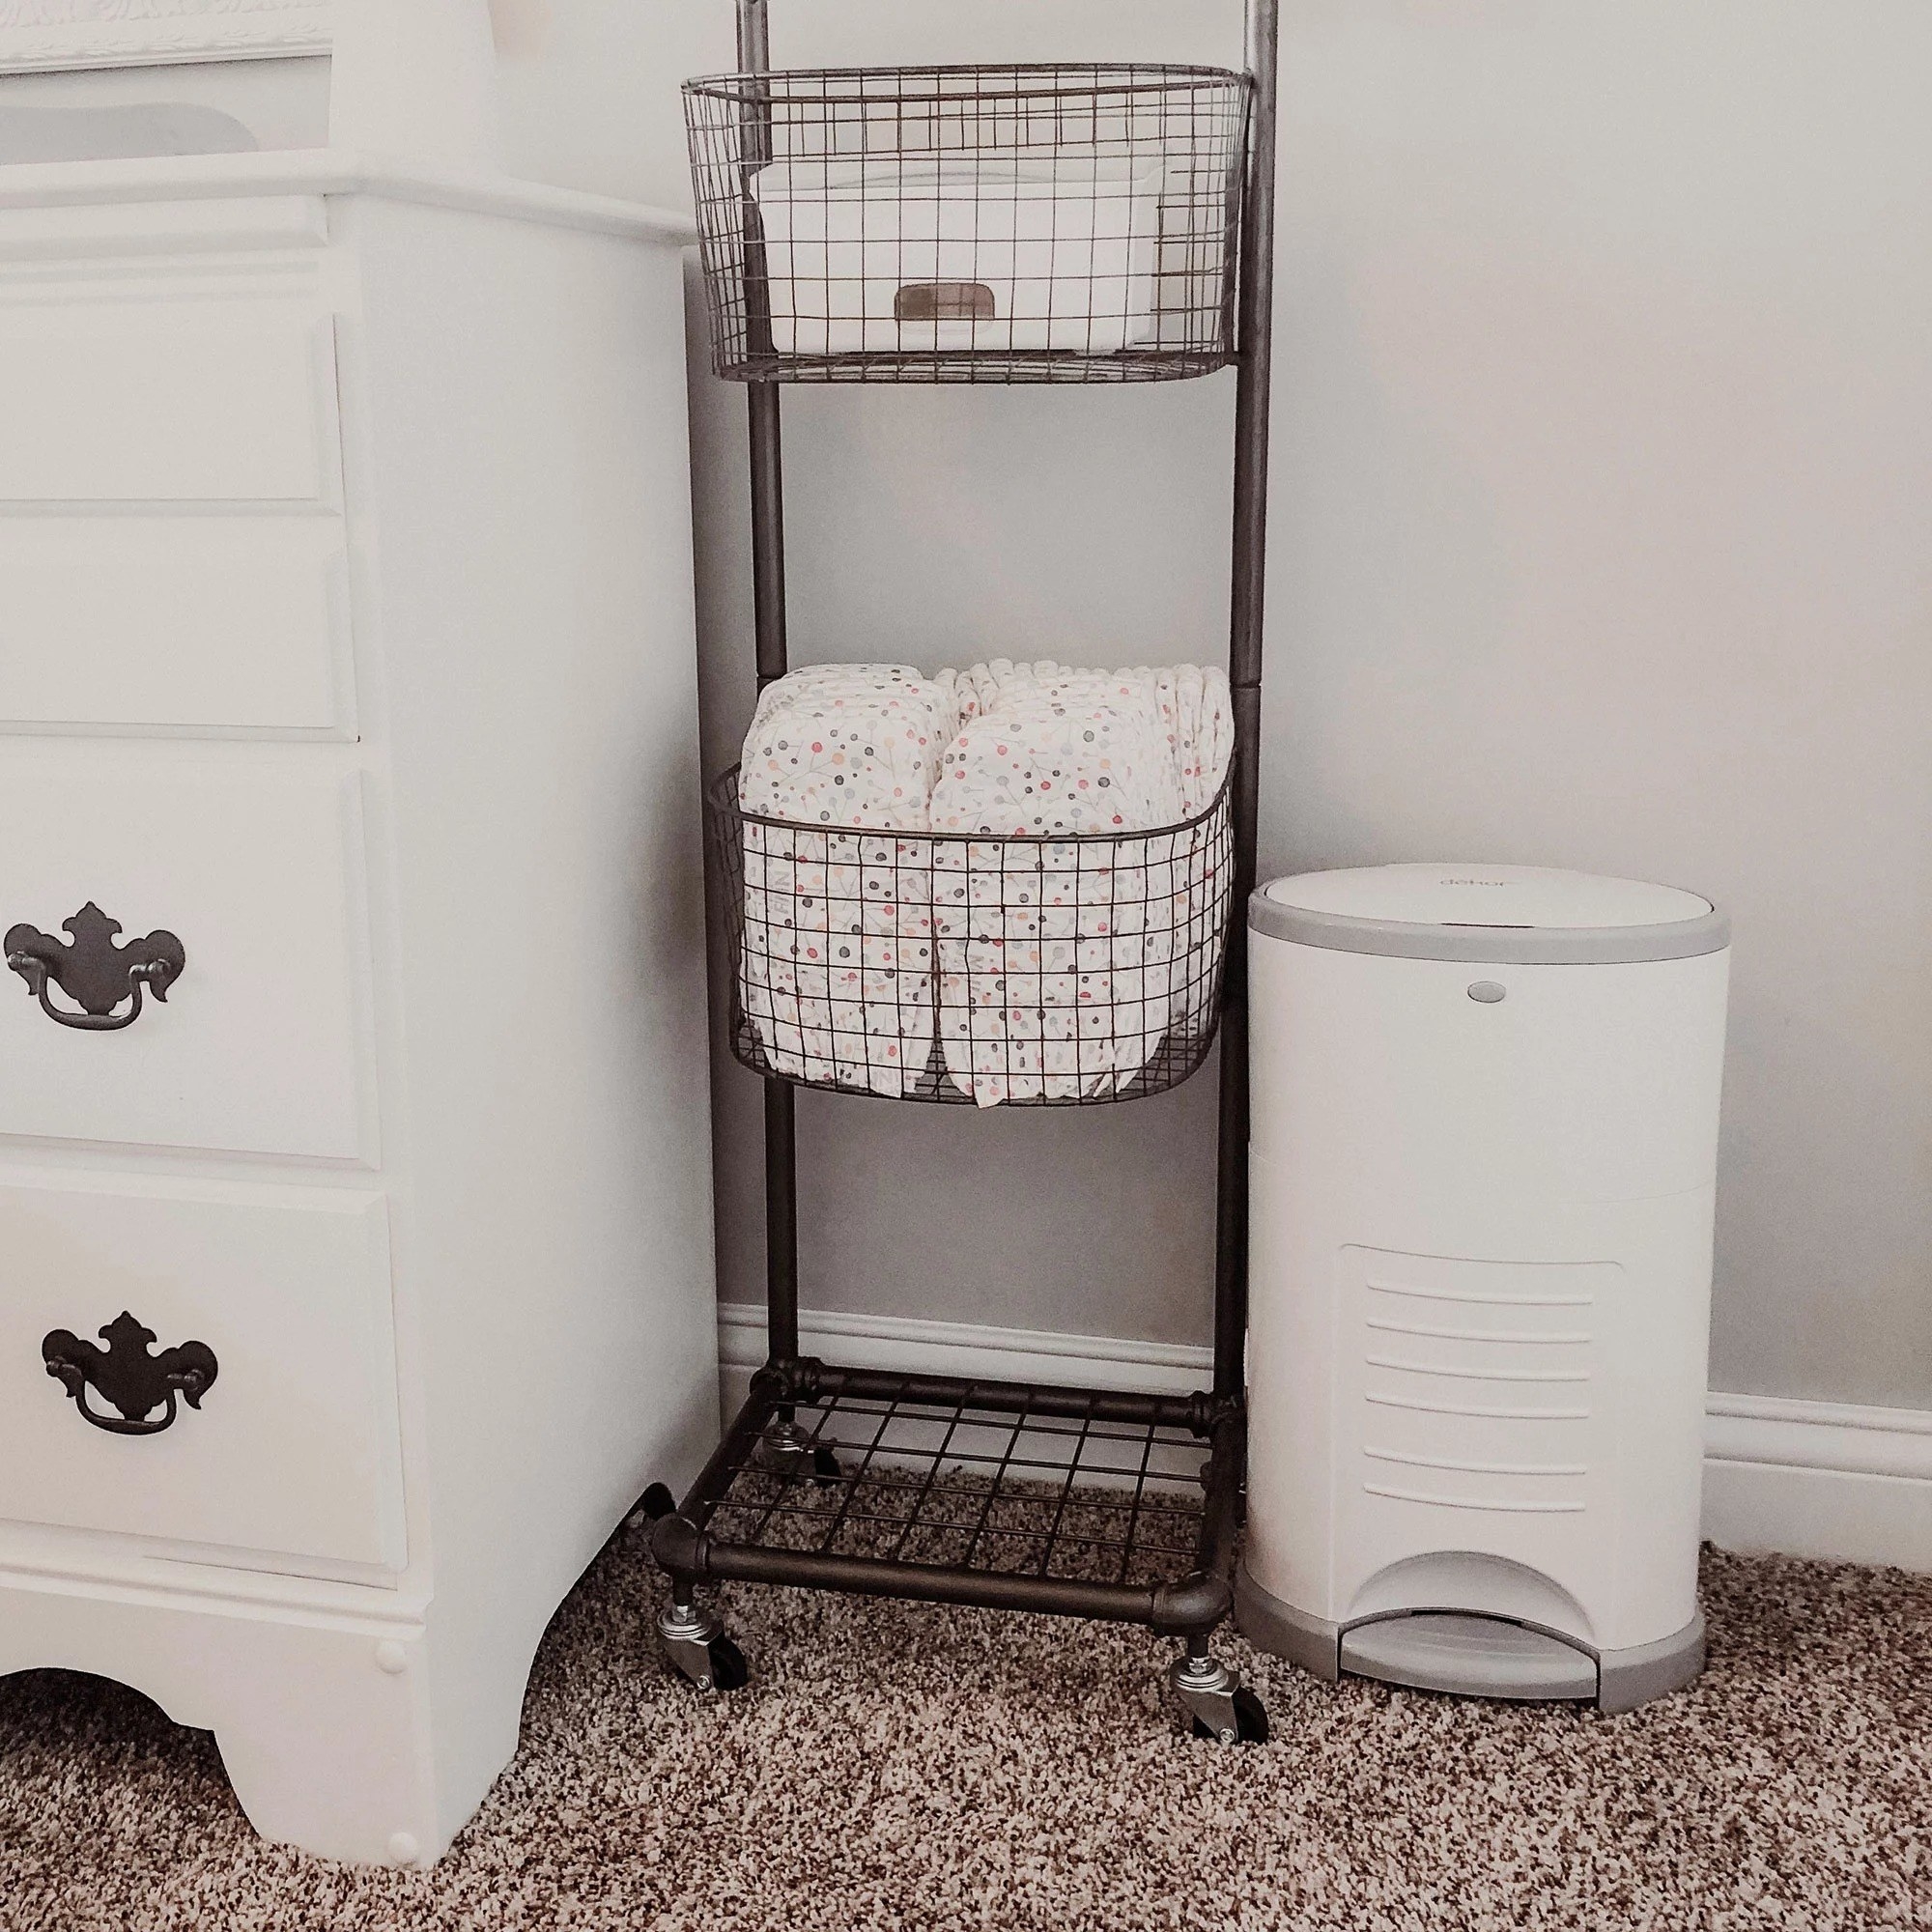 Diaper pail next to diapers